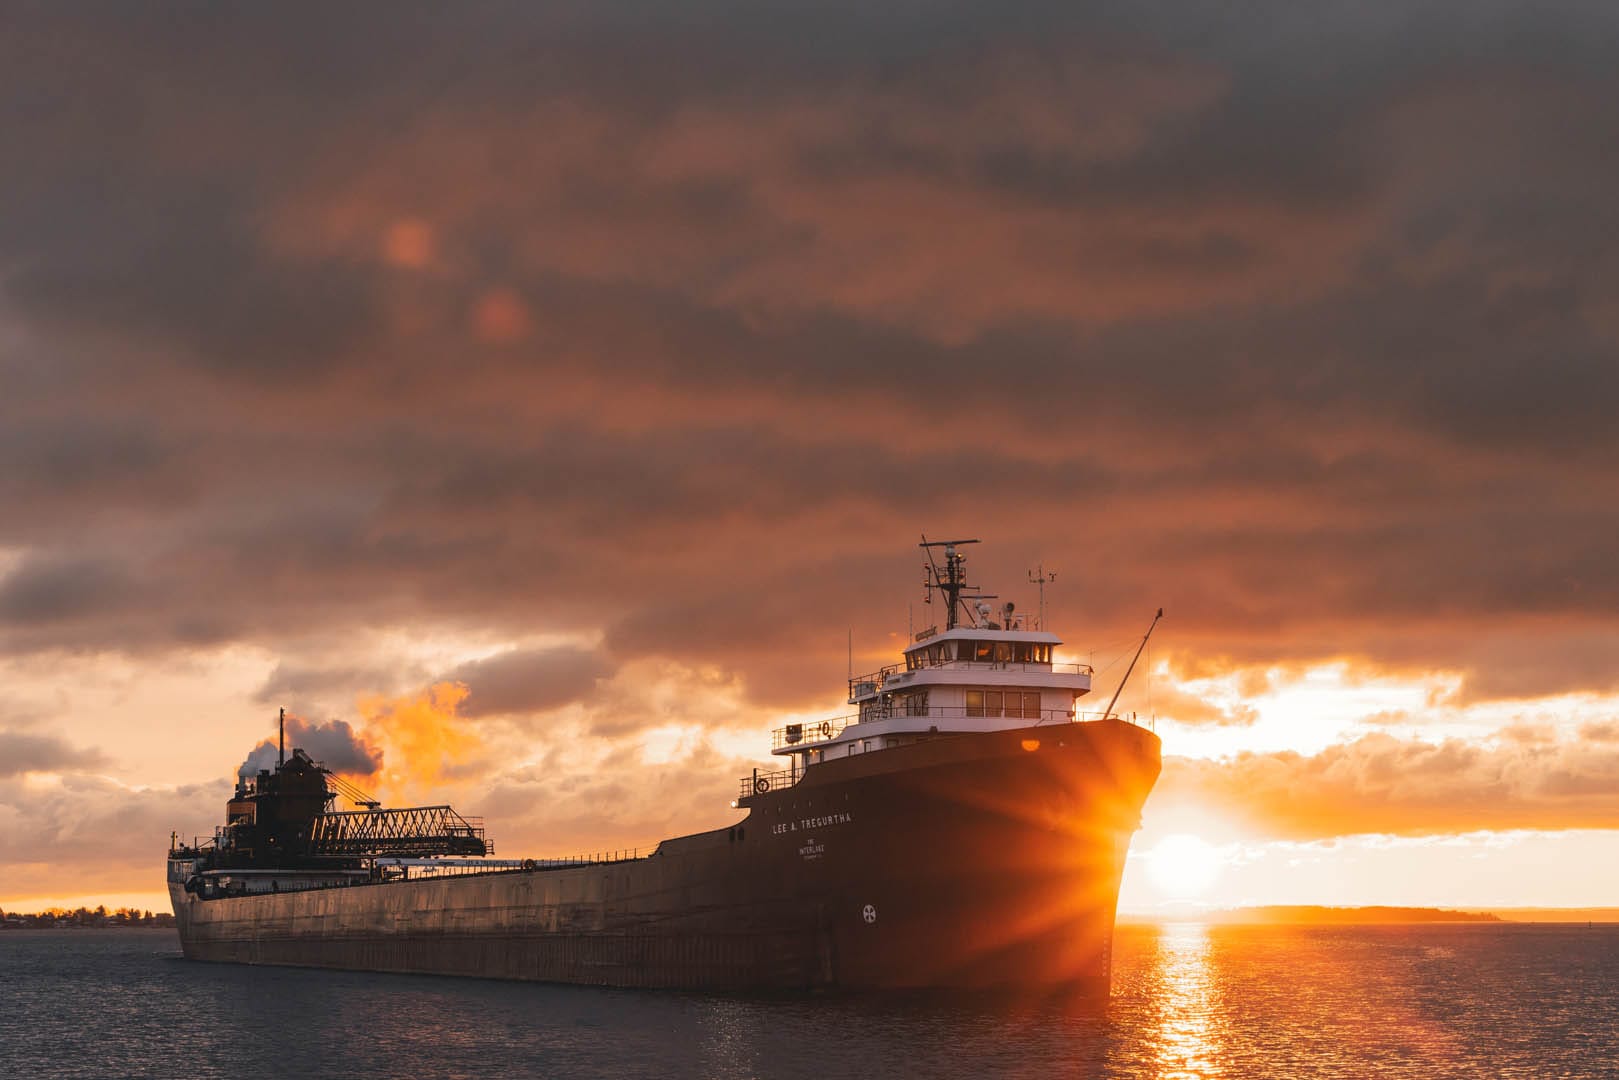 A laker with a sunrise in the background. The entire photo has an orange effect from the color of the sunrise. The ship is traveling as there is smoke coming out of the chimney in the back.